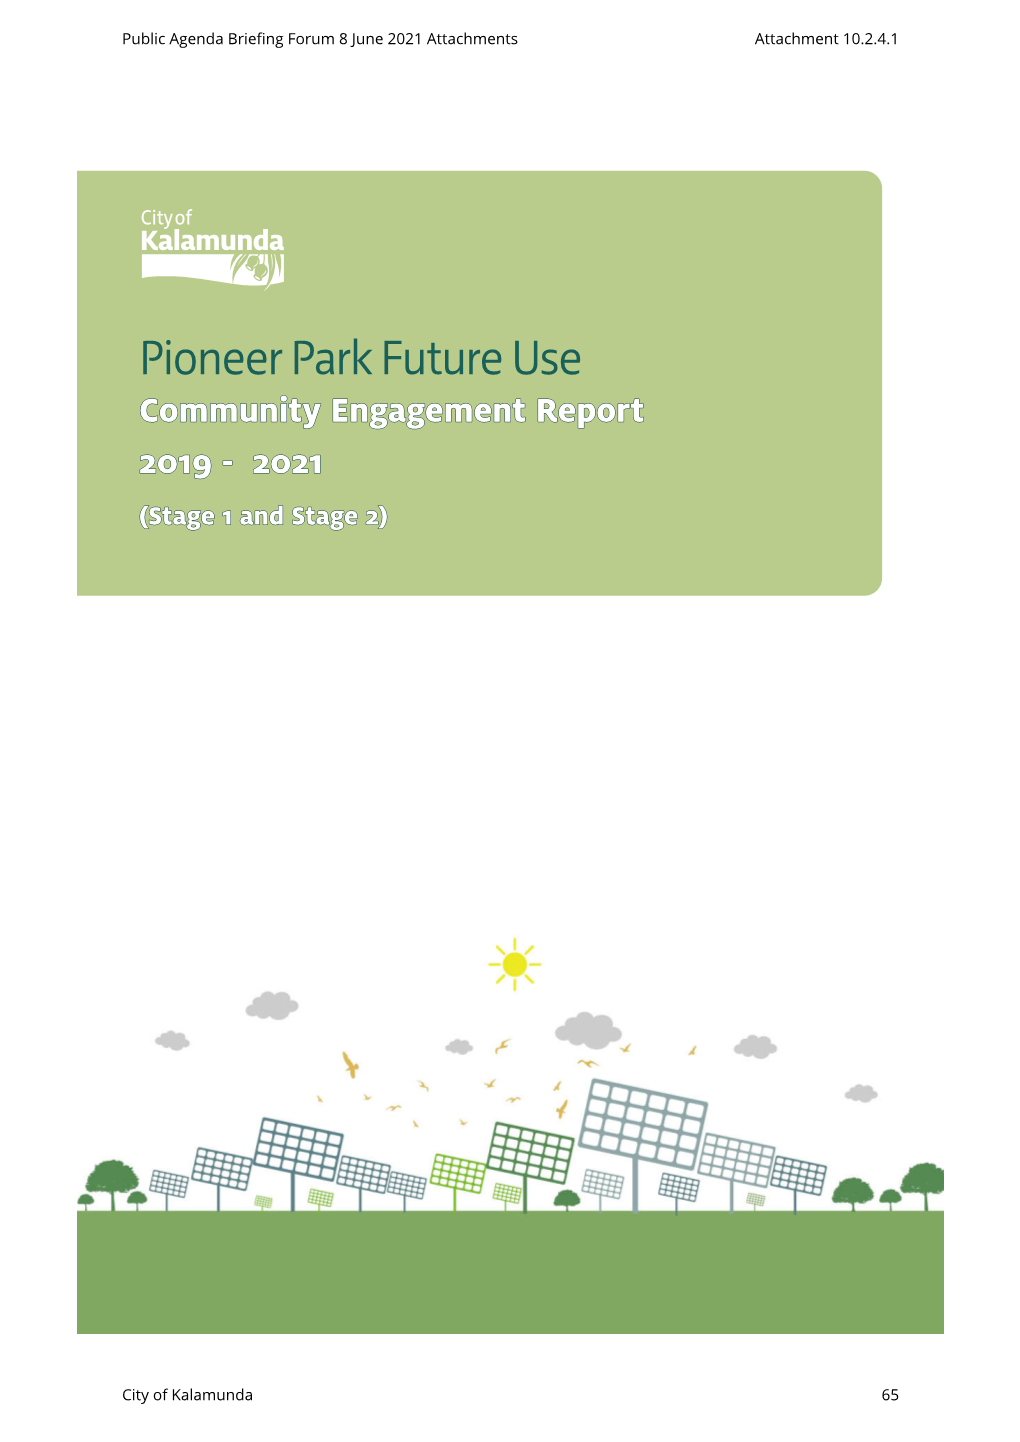 Pioneer Park Future Use Community Engagement Report 2019 - 2021 (Stage 1 and Stage 2)